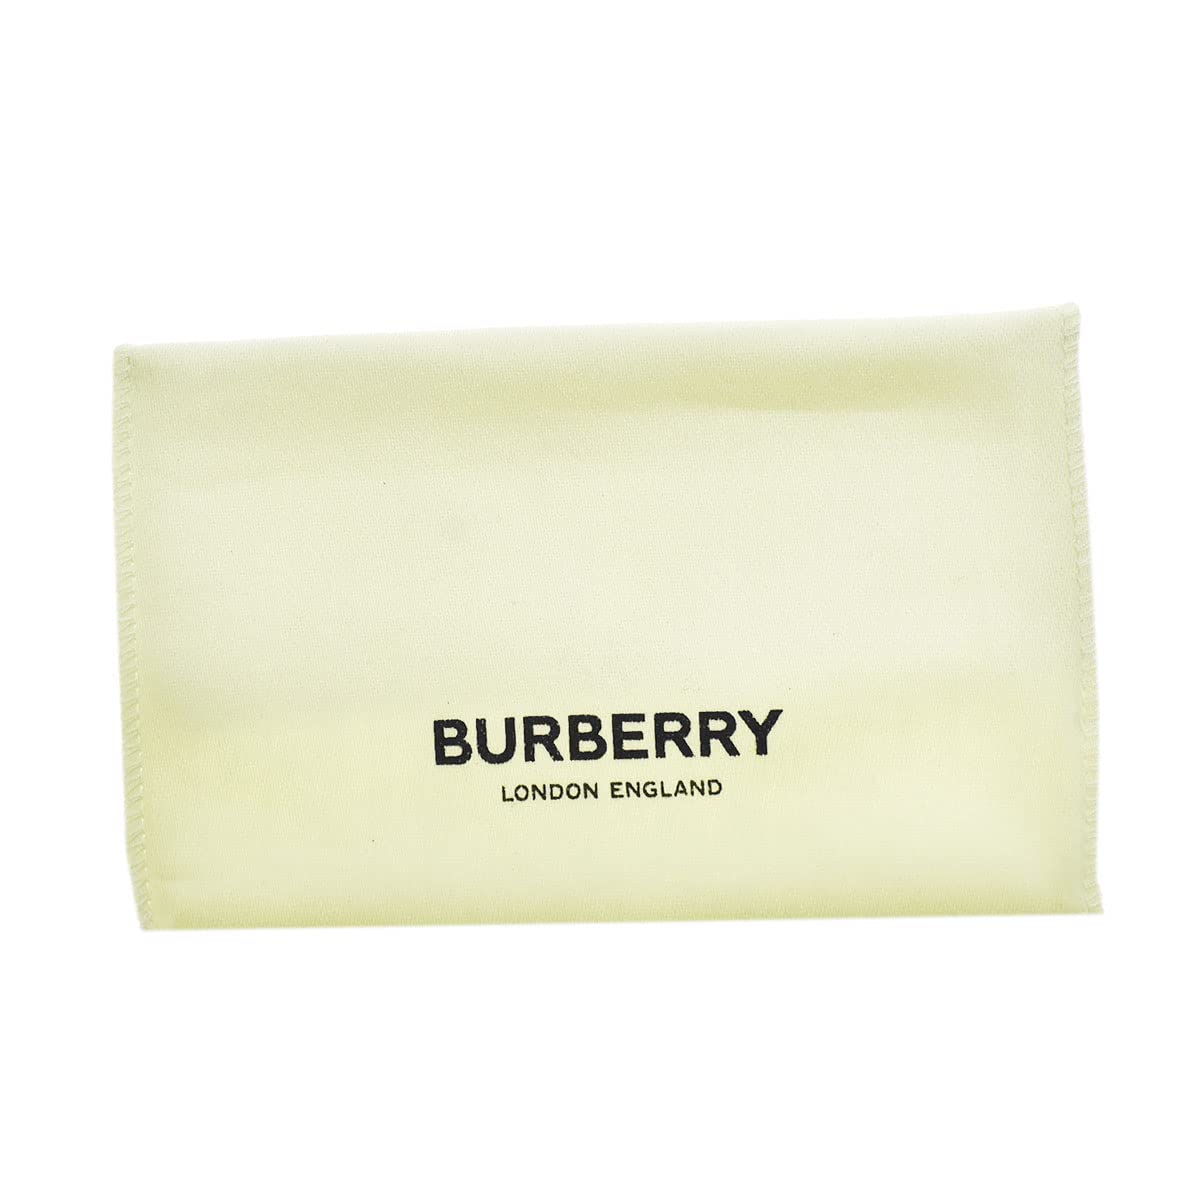 [BURBERRY] [Burberry] Card Case Archive Beige ARCHIVE BEIGE MS CHASE 8049594 116398 A7026 [Parallel Import], A7026 ARCHIVE BEIGE (Archive Beige)